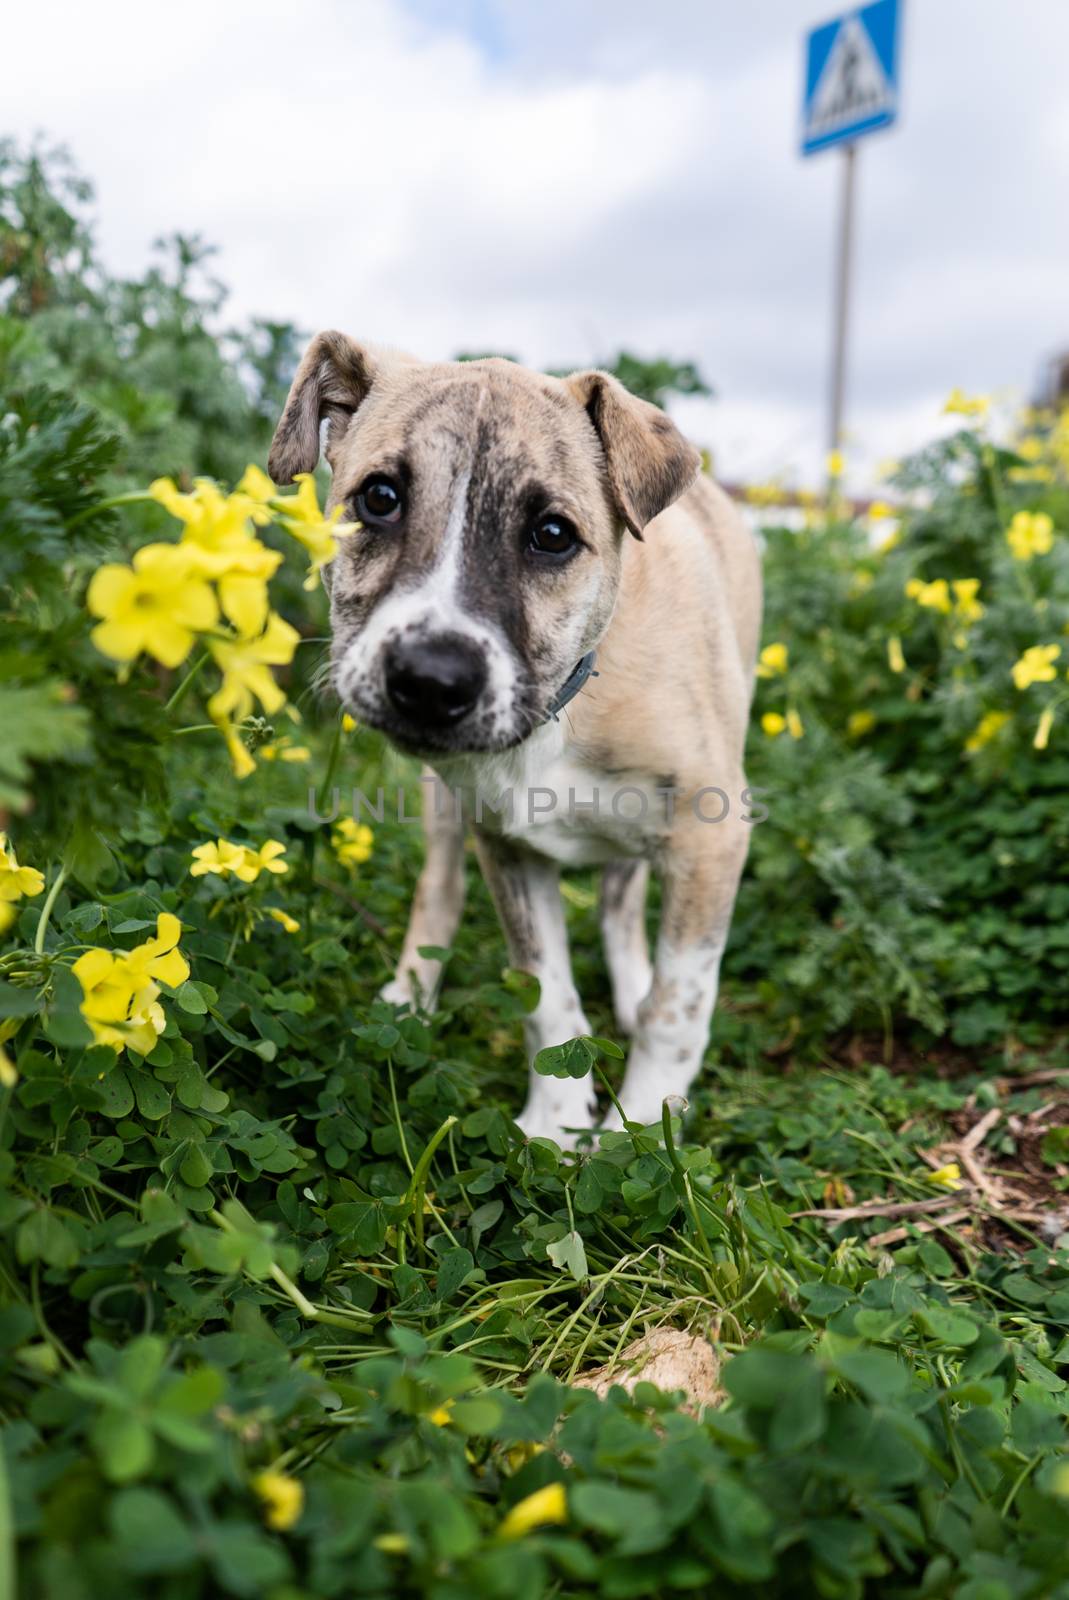 Vertical photograph of a mixed breed puppy strolling through the green field full of daisies and a road sign in the background.